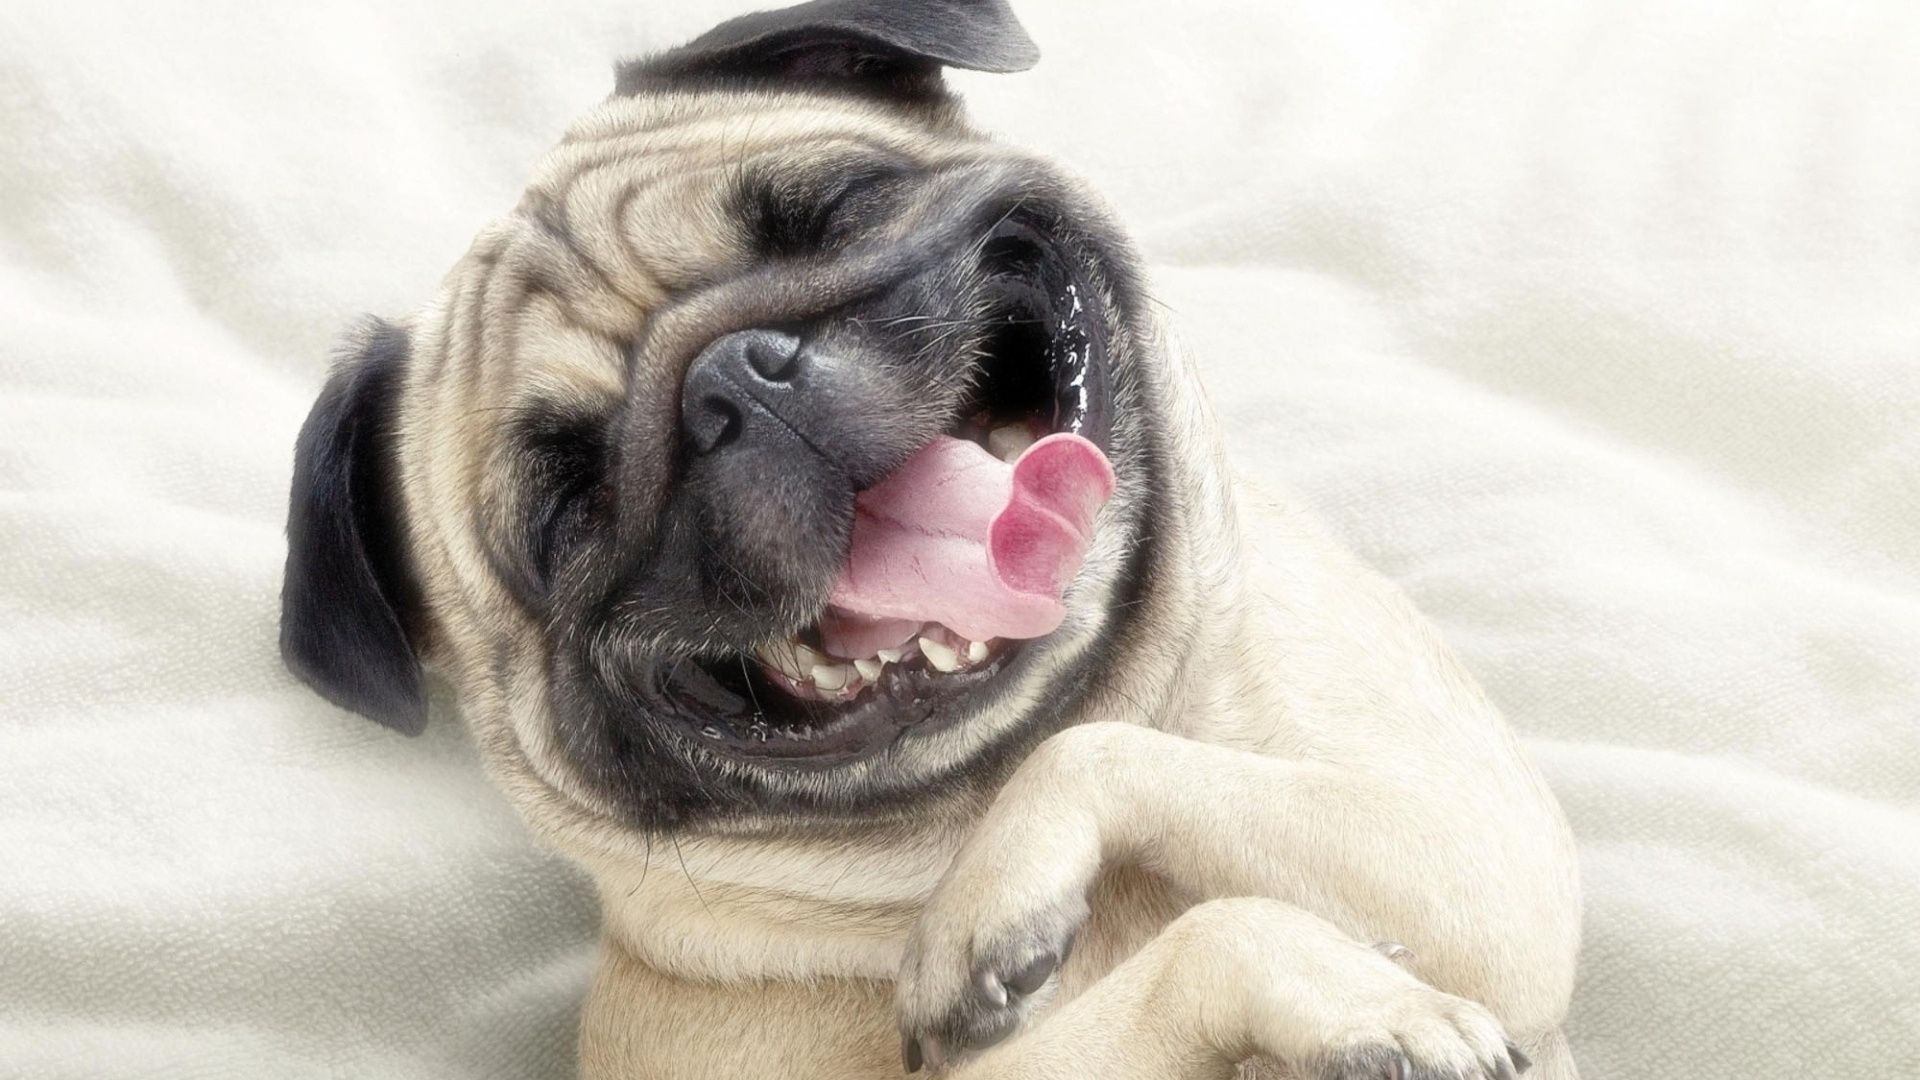 12 Cute Pug Dog Wallpapers Backgrounds HD | All Puppies Pictures ...